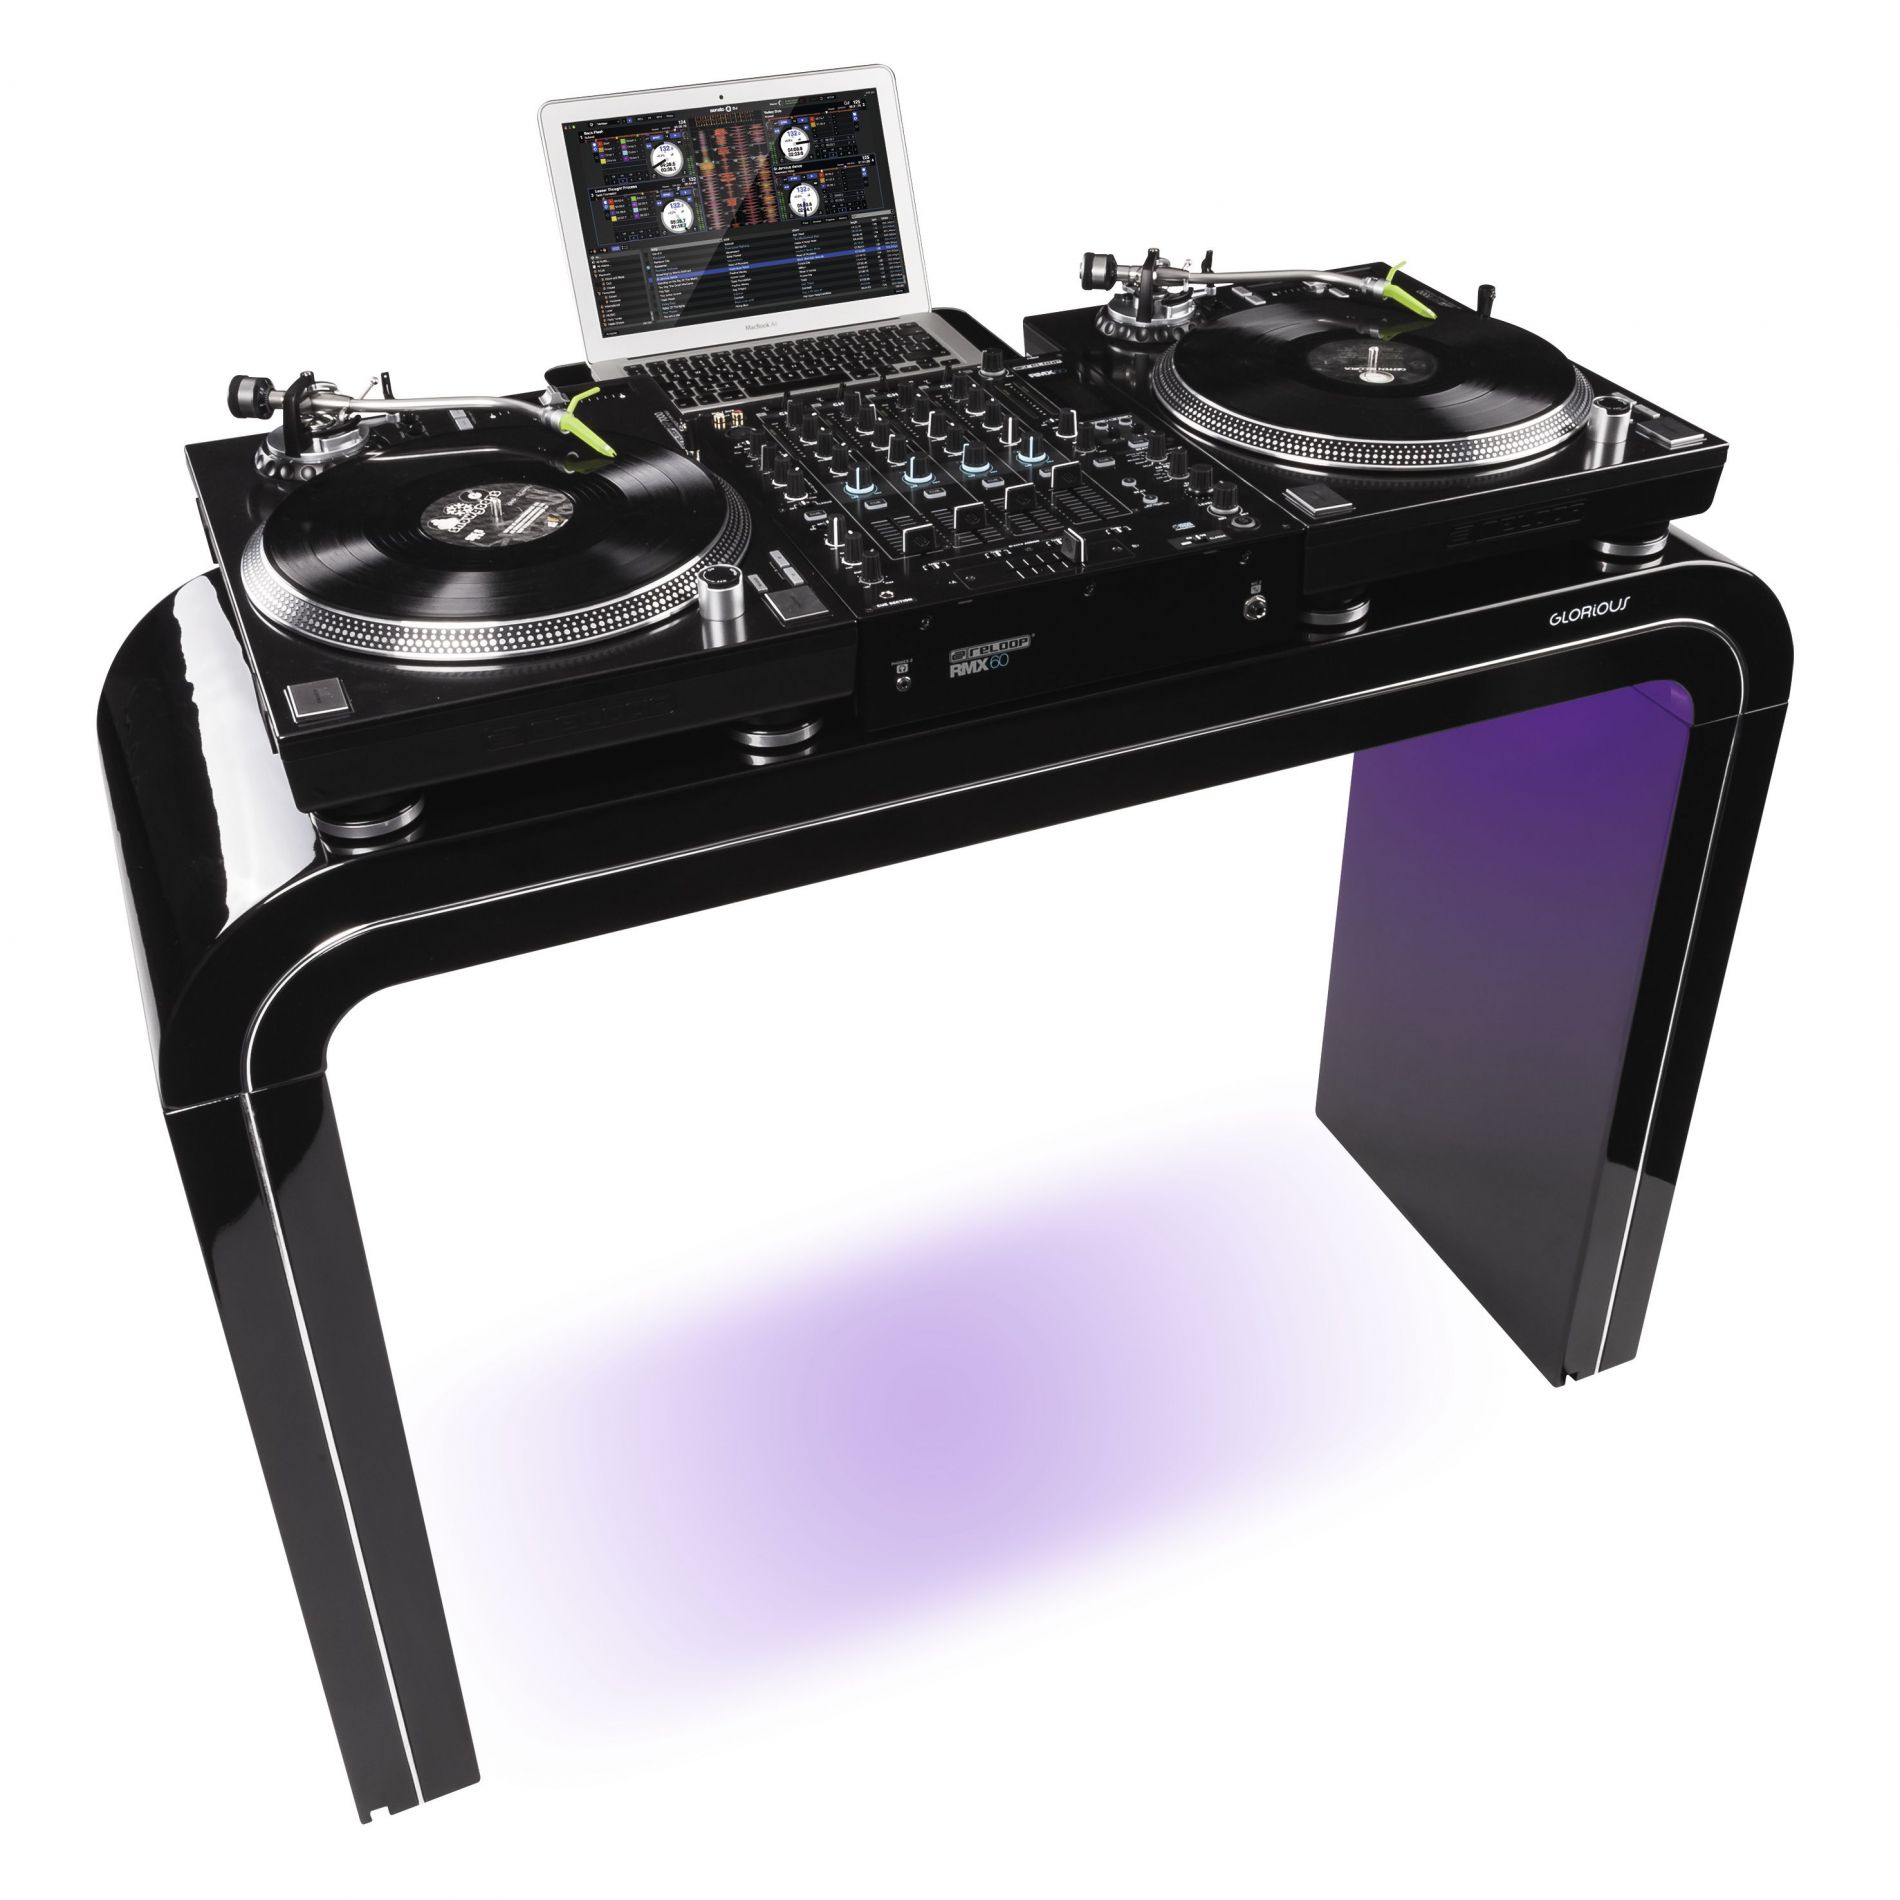 Session Cube Laptop Stand Dj access Glorious